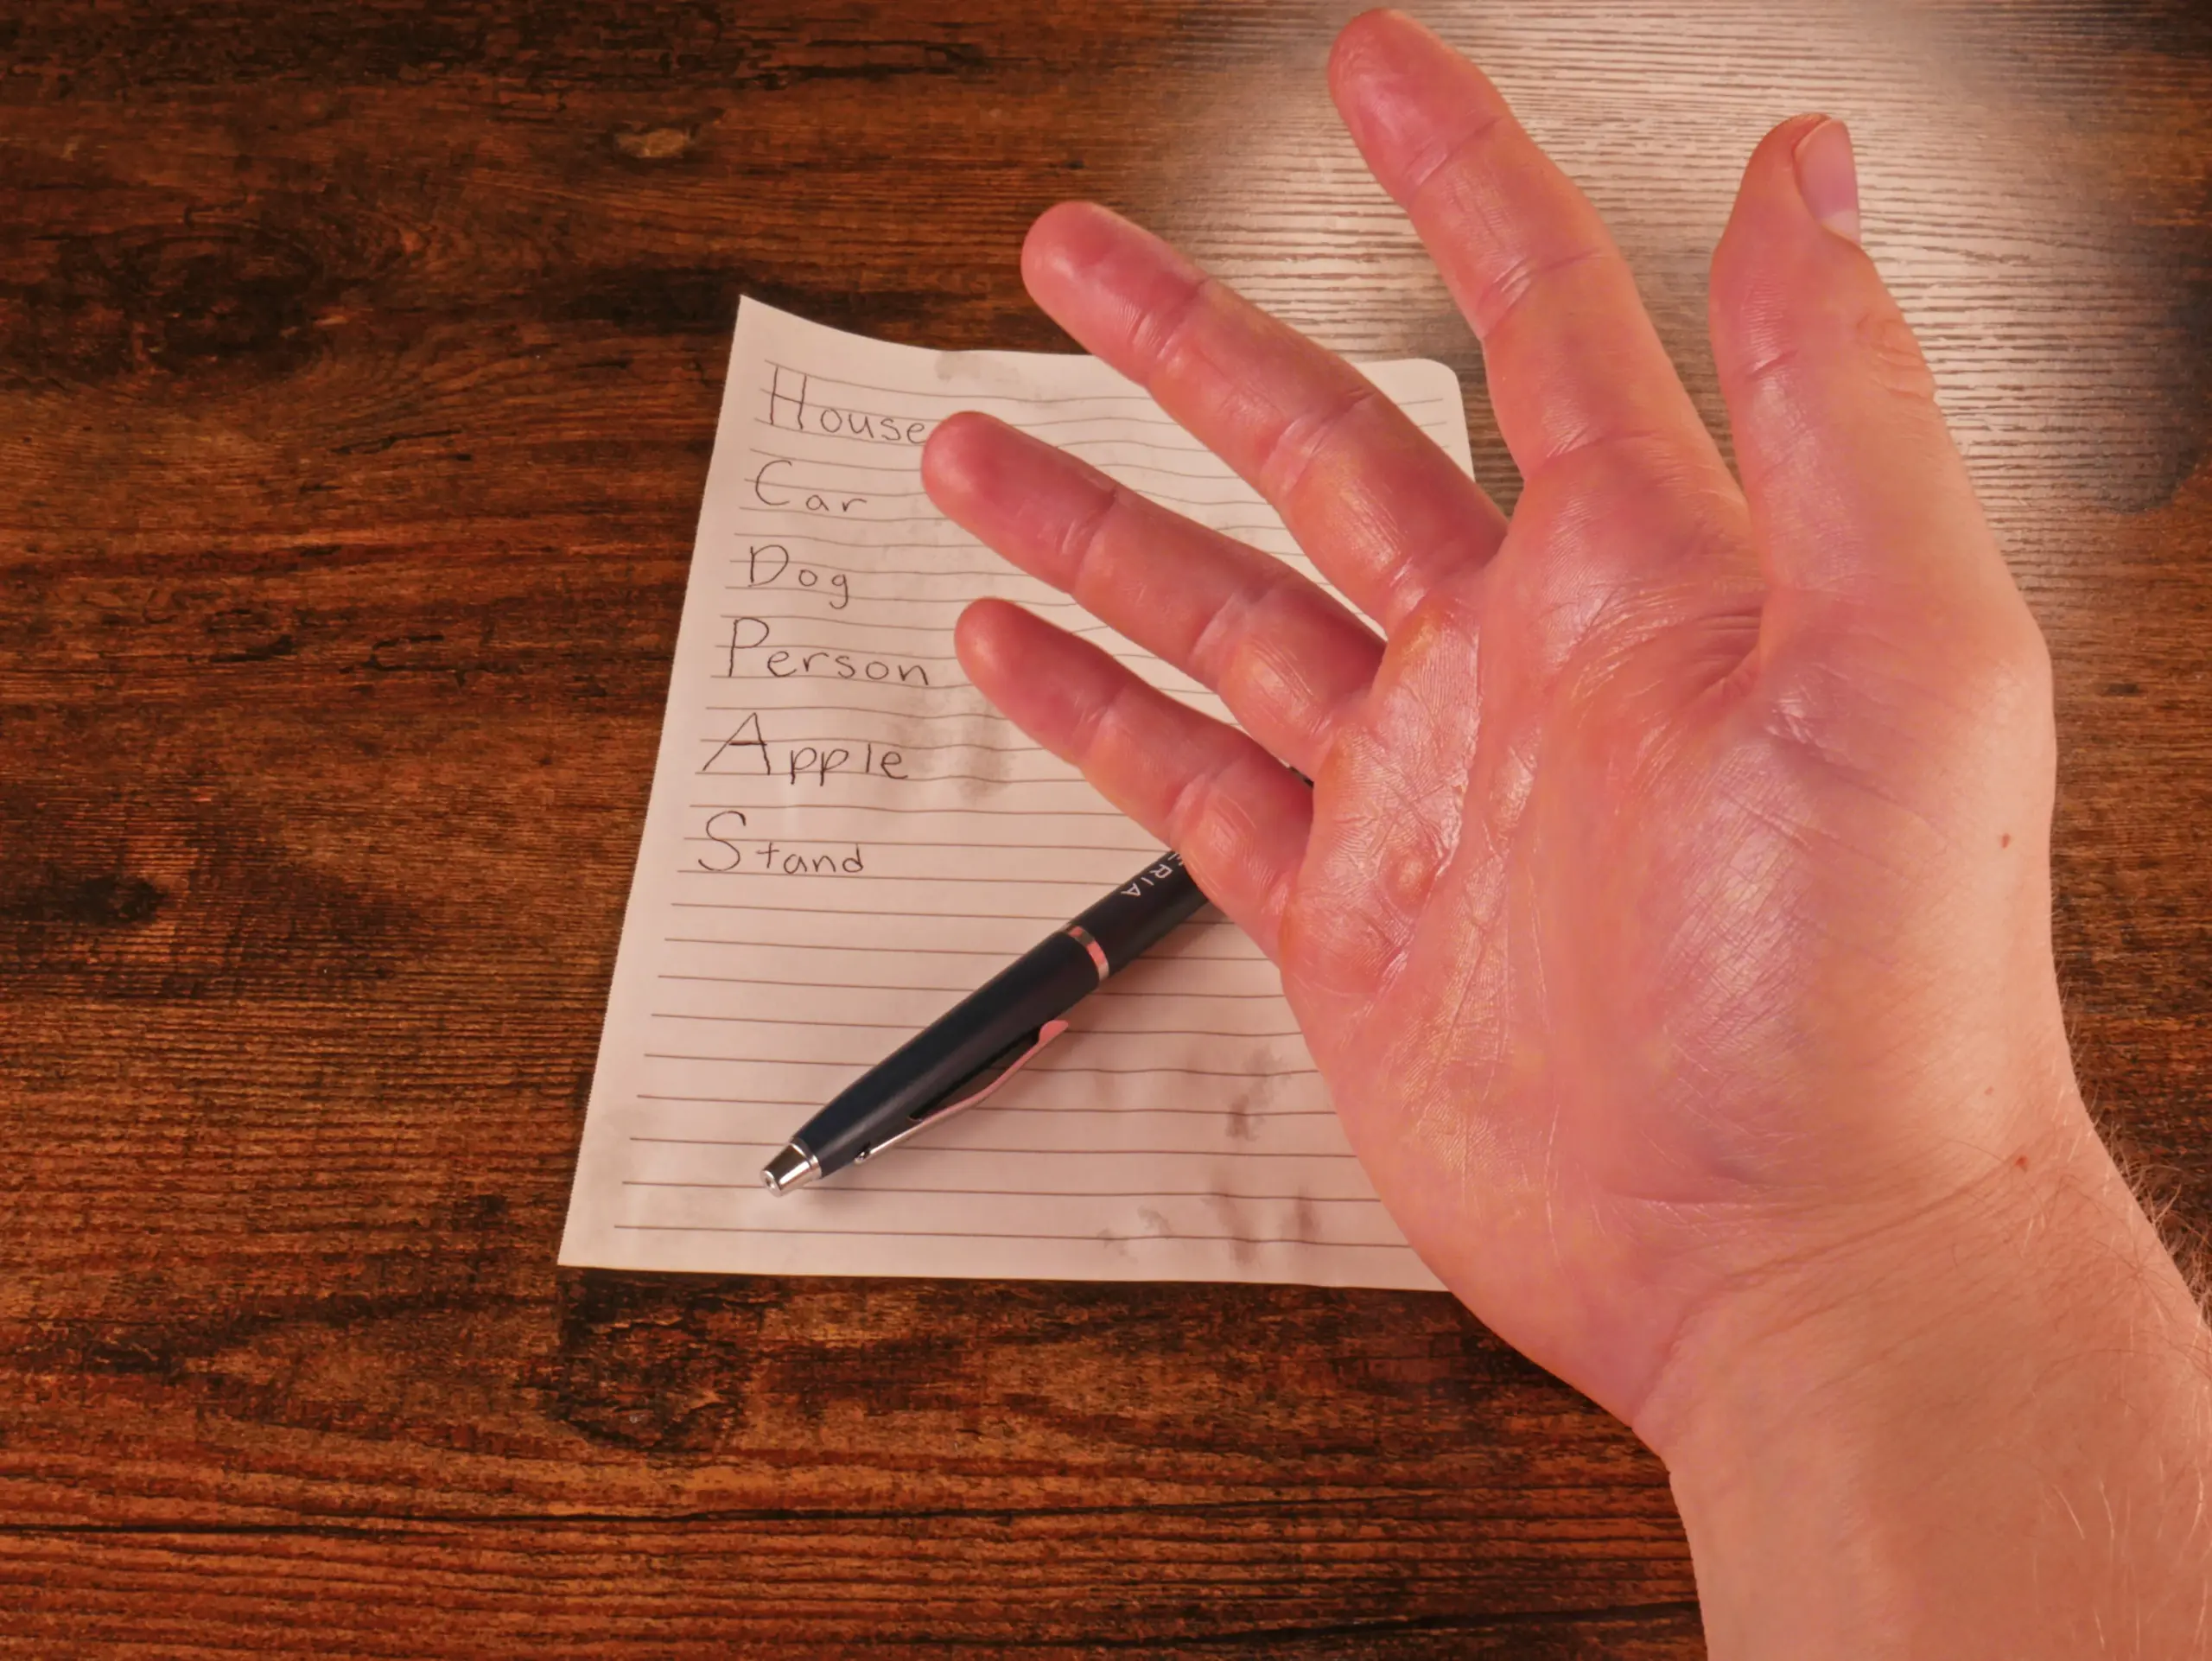 Close up image of a hand of a person who has hyperhidrosis. Hand covered in sweat. Behind hand is pen and piece of paper with sweat marks sitting on a wooden desk. [insurance coverage for medical supplies] [ RA fischer hyperhidrosis iontophoresis ]